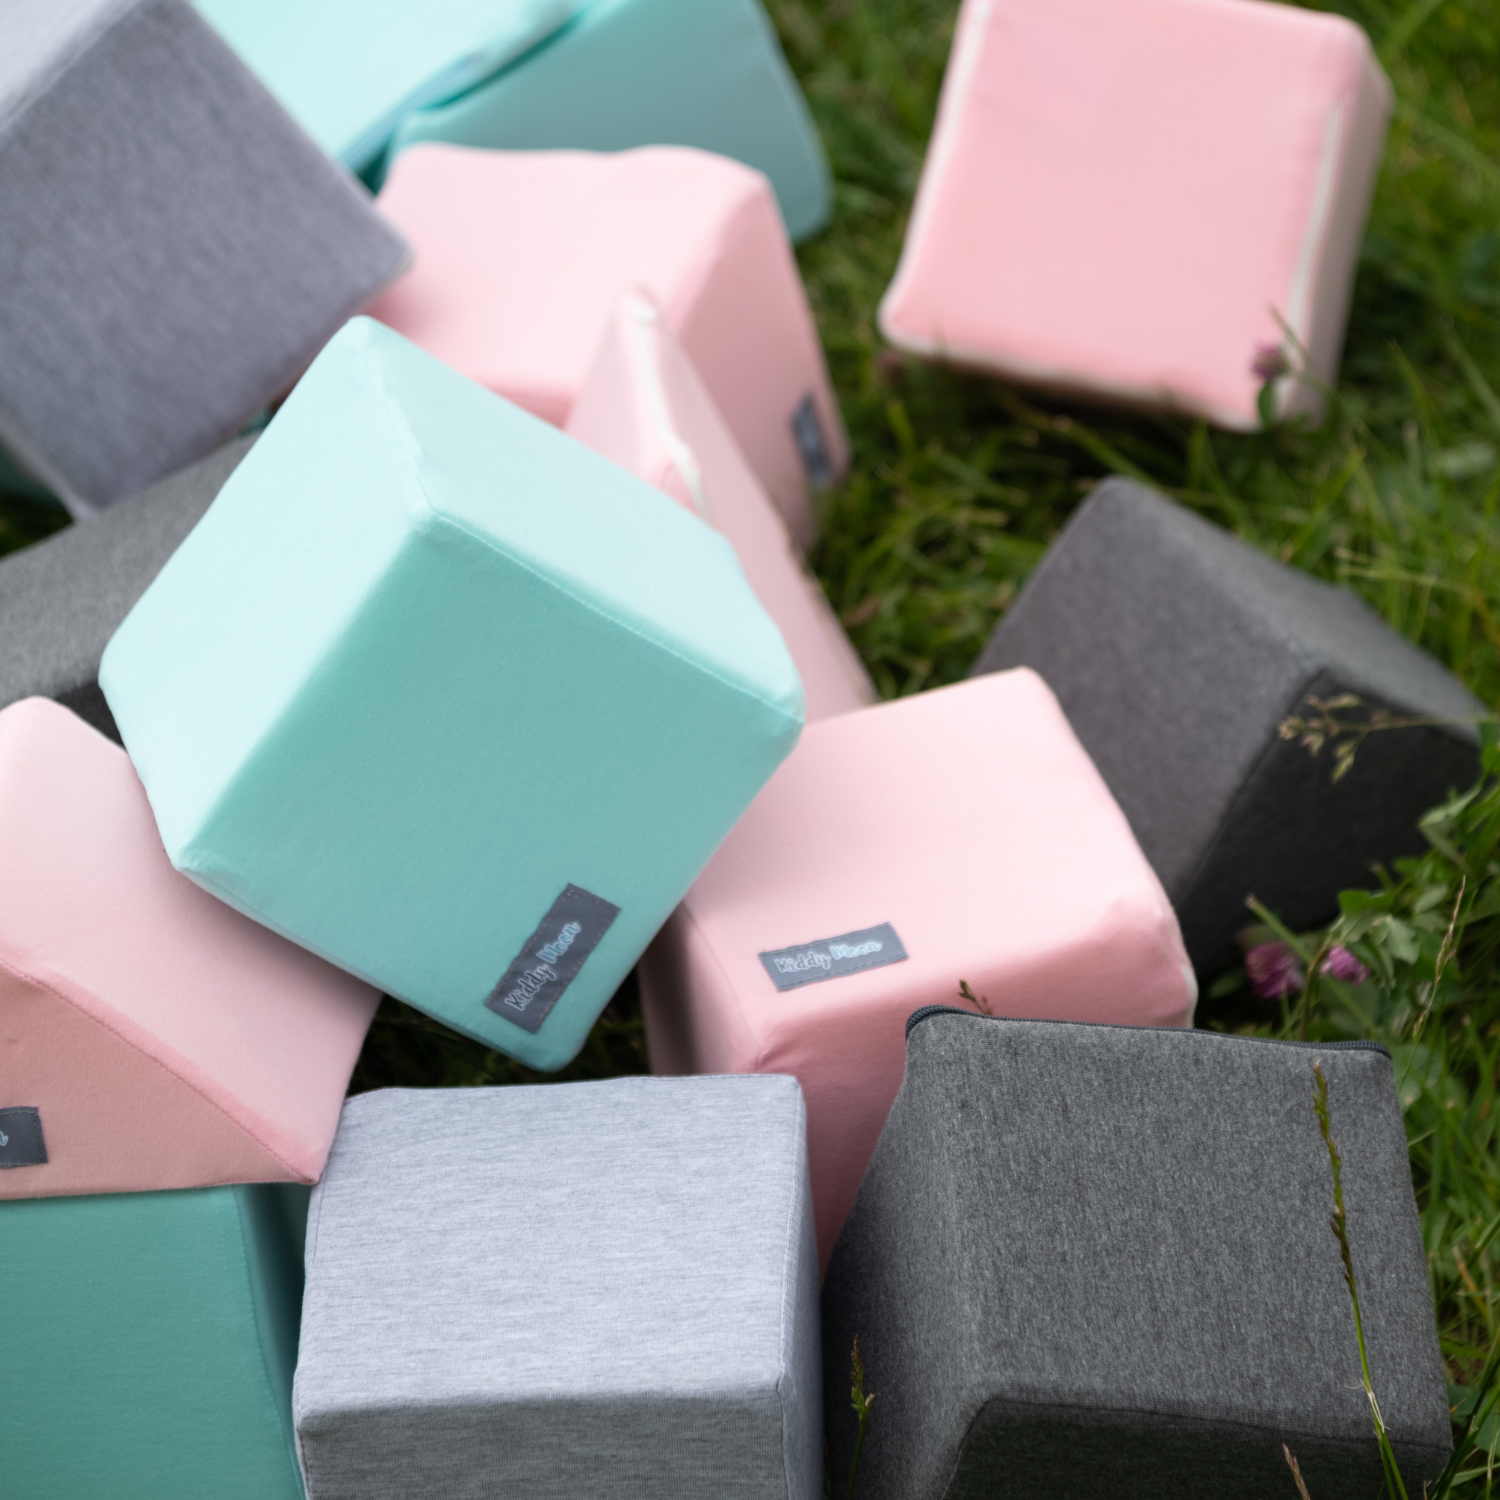 KiddyMoon Soft Foam Cubes Building Blocks 14cm for Children Multifunctional  Foam Construction Montessori Toy for Babies, Certified Made in The EU,  Cubes: Light Grey-Mint